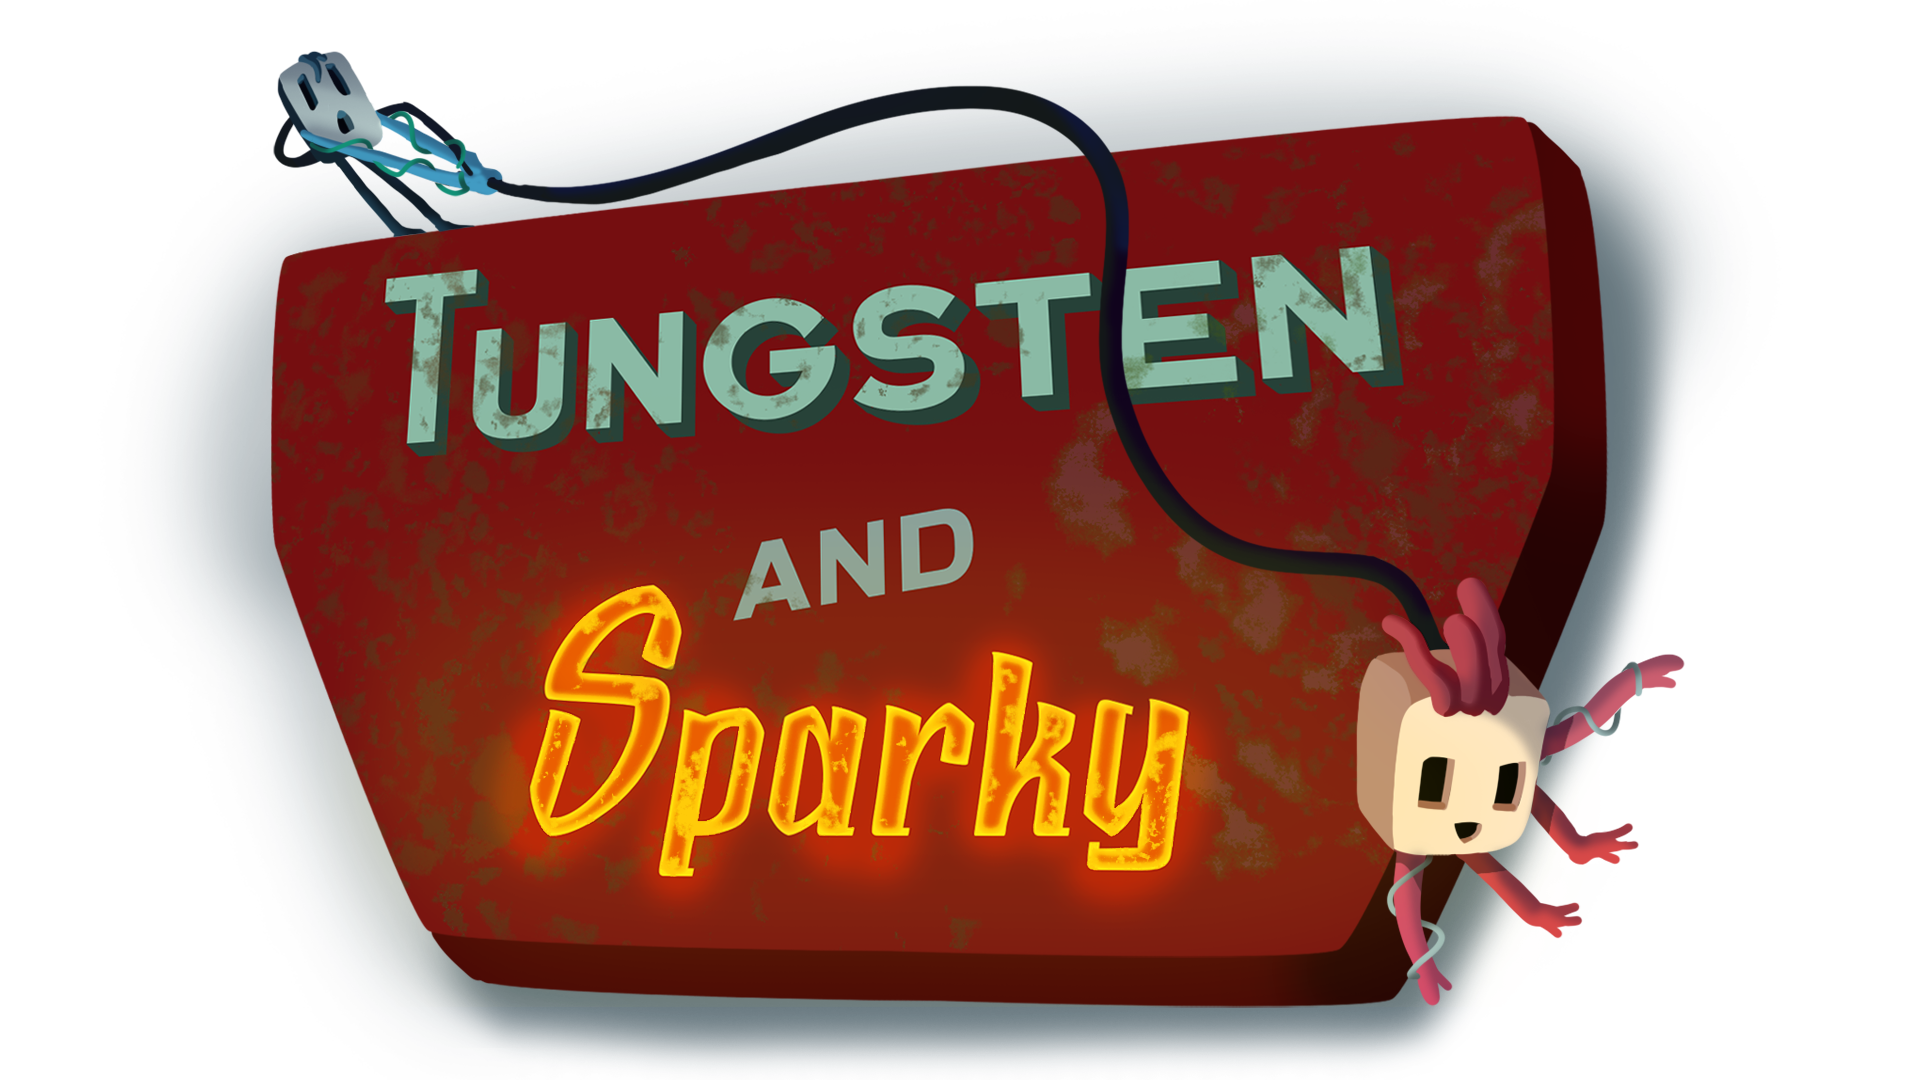 Tungsten and Sparky